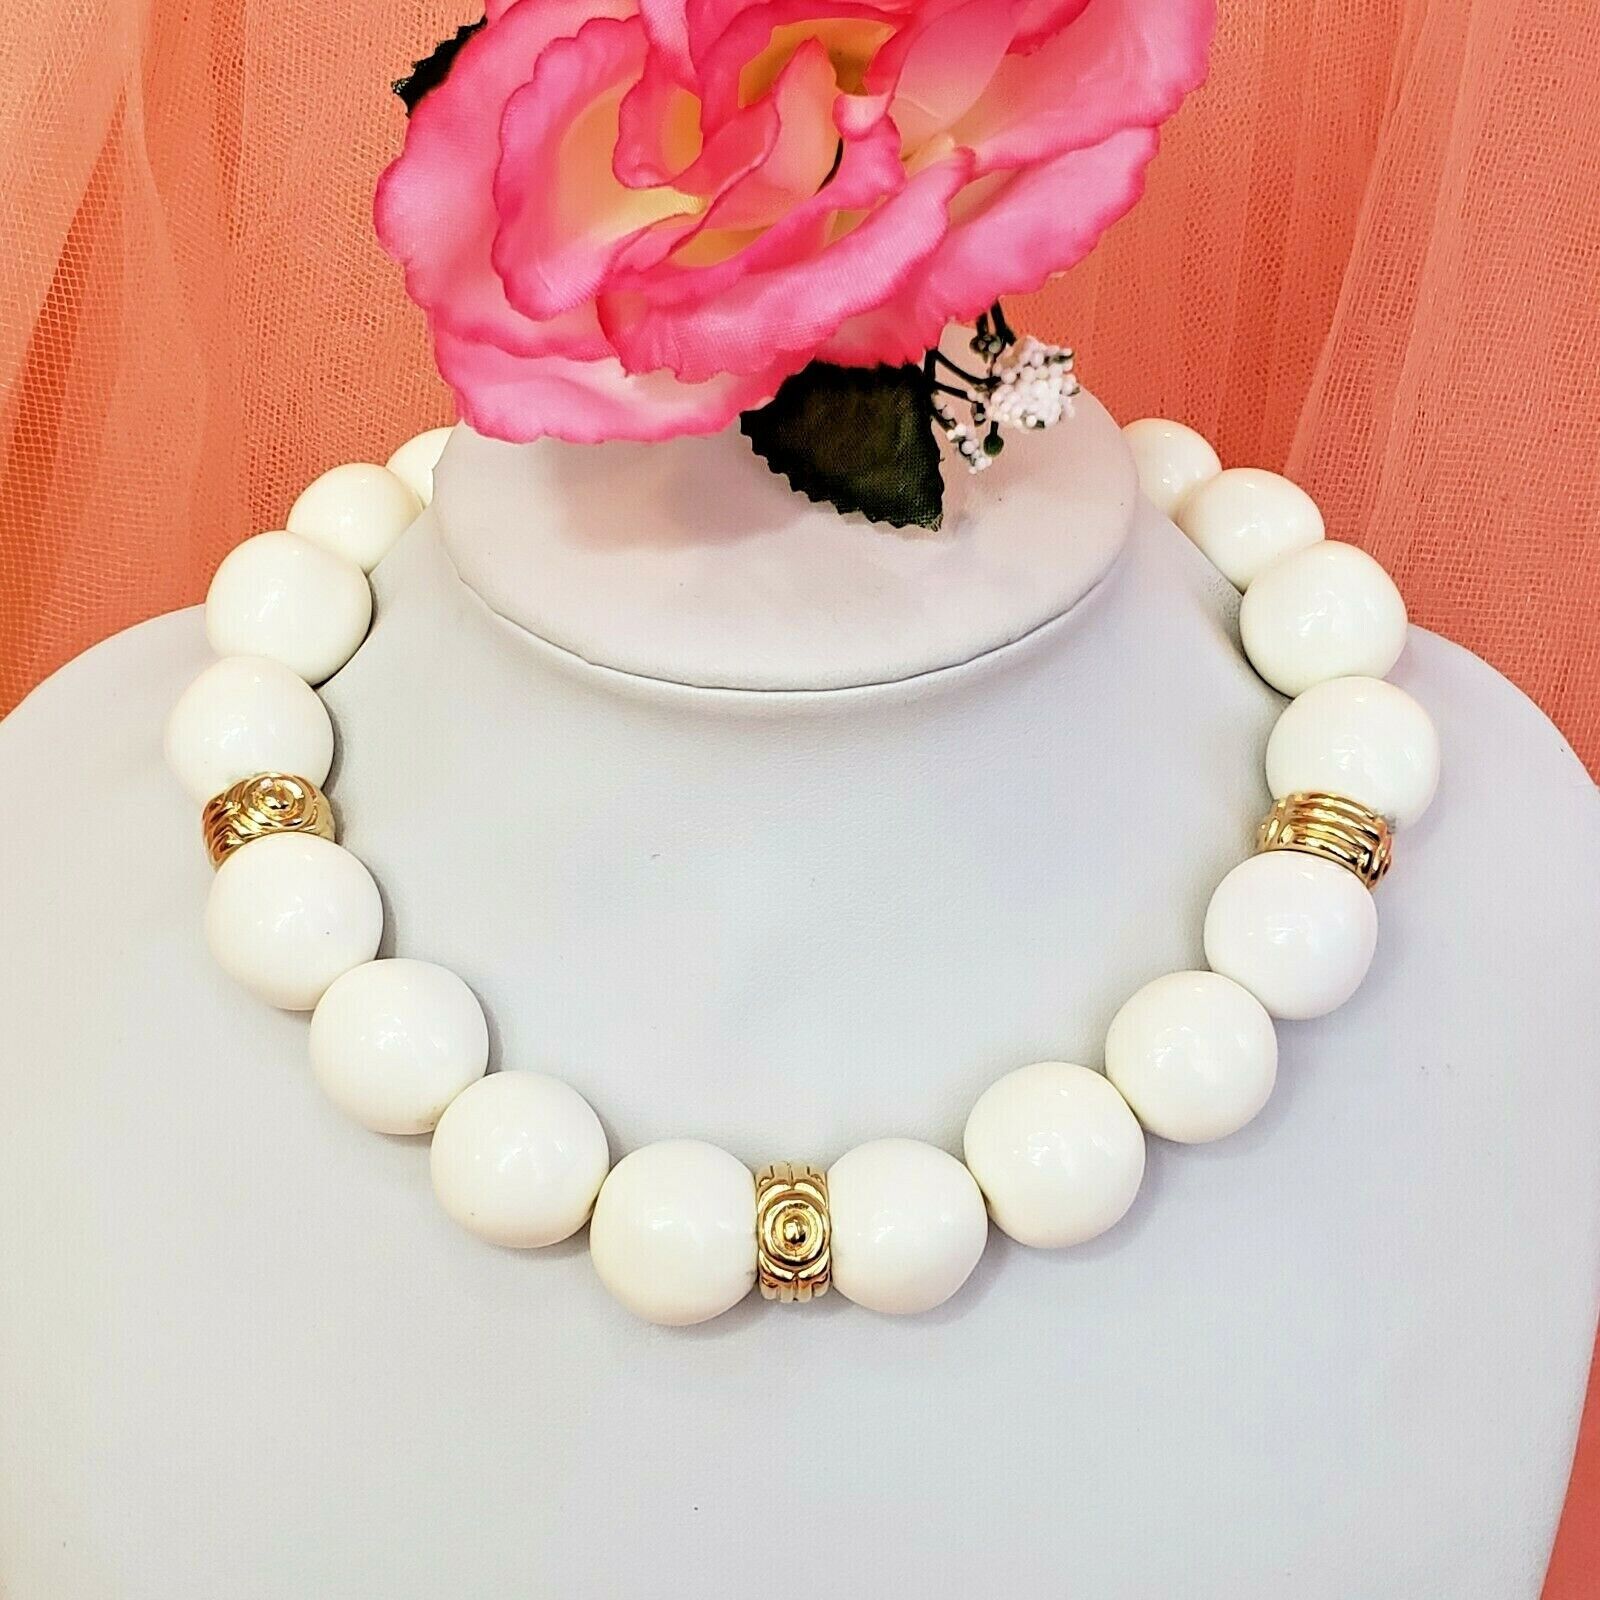 Vintage Runway GIVENCHY White & Gold Choker Necklace White & Gold Beads - $199.95